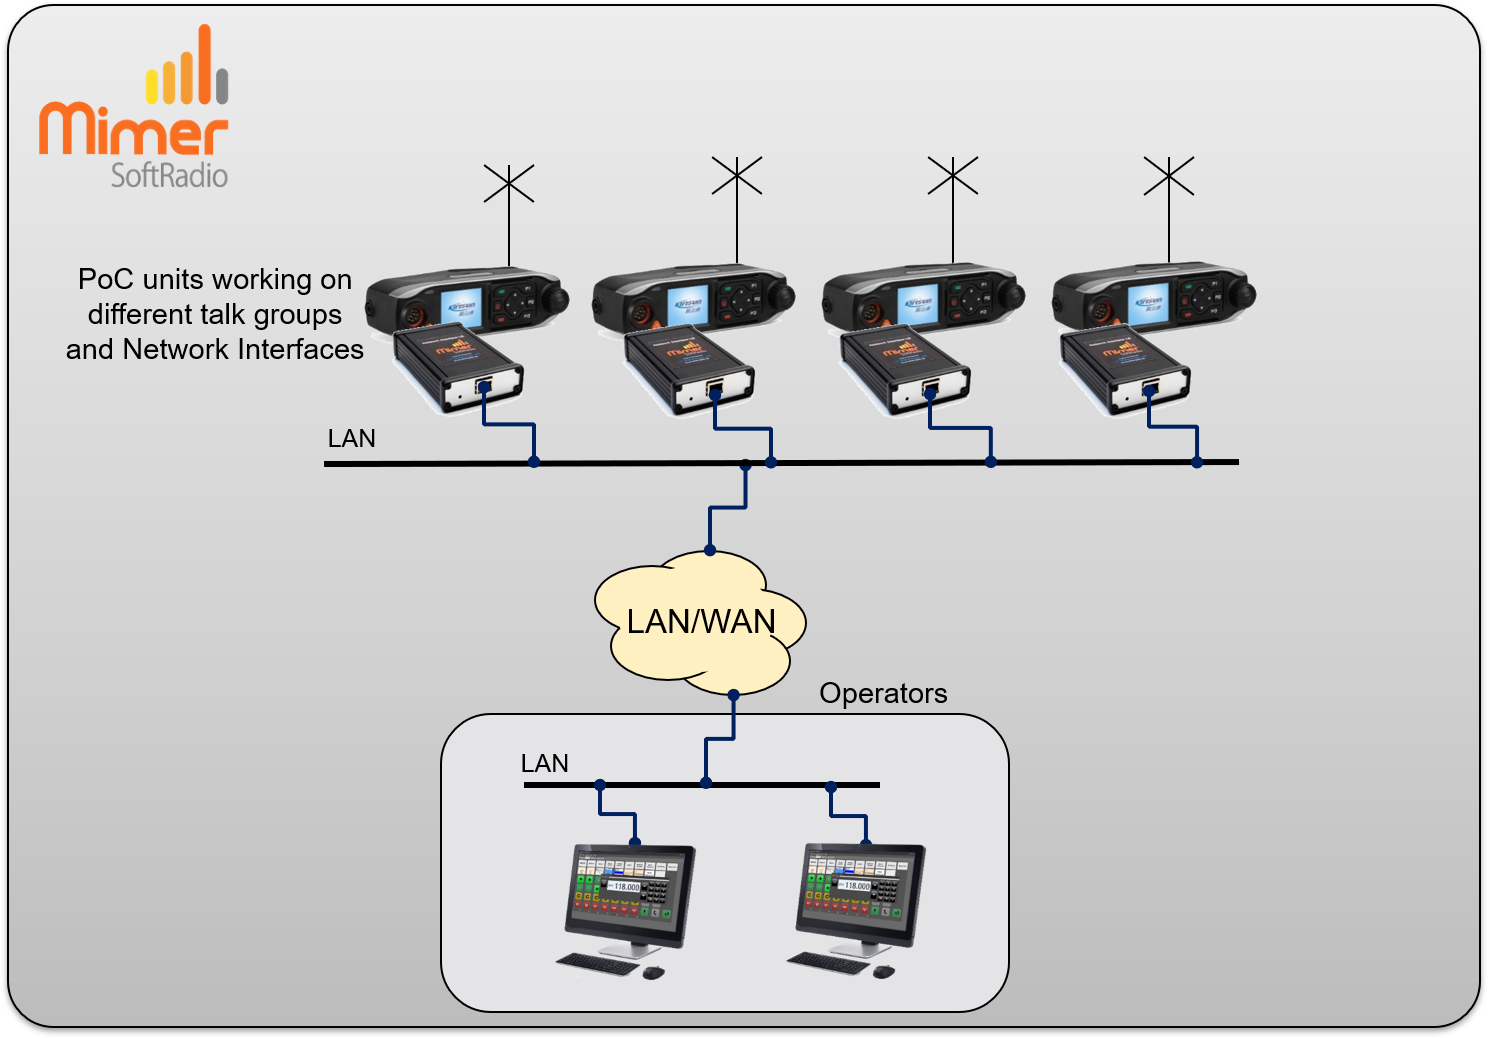 Two operators working with four PoC units on different talk groups